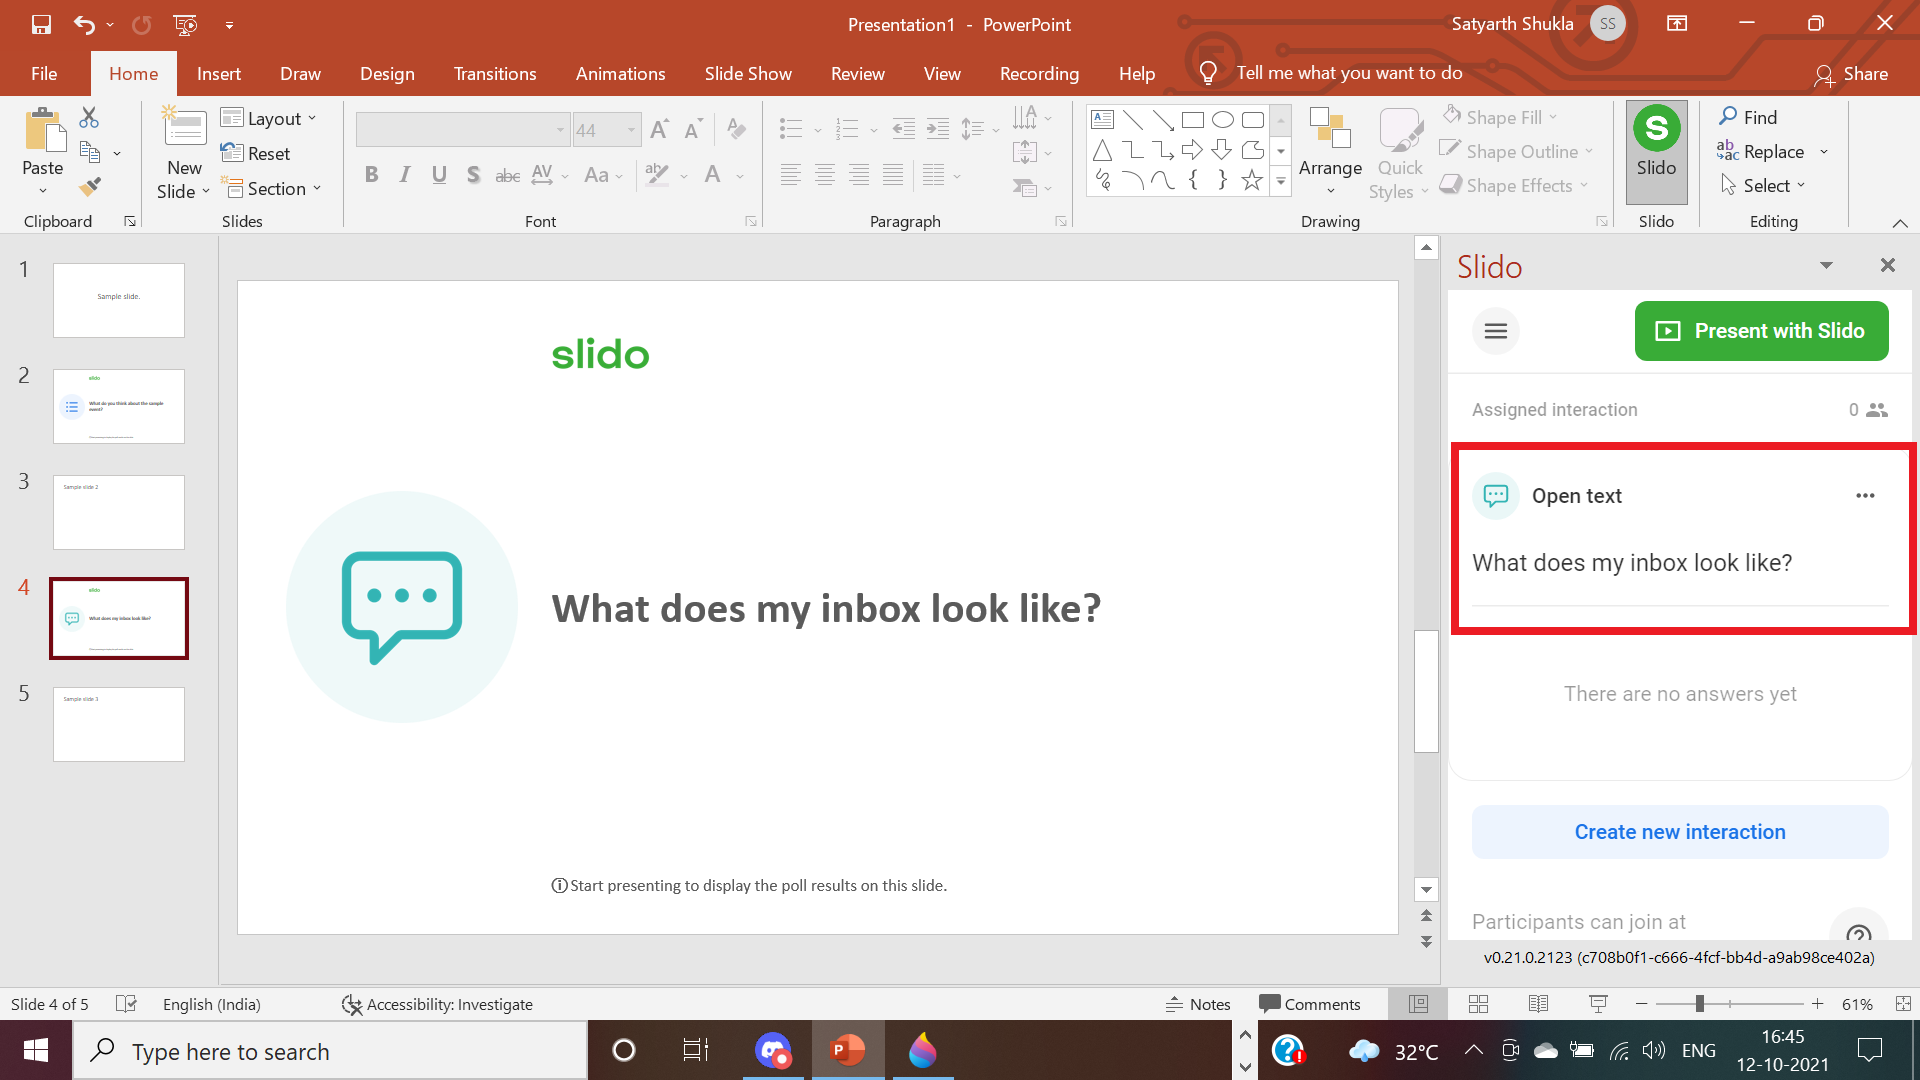 Adding open text question in slido.